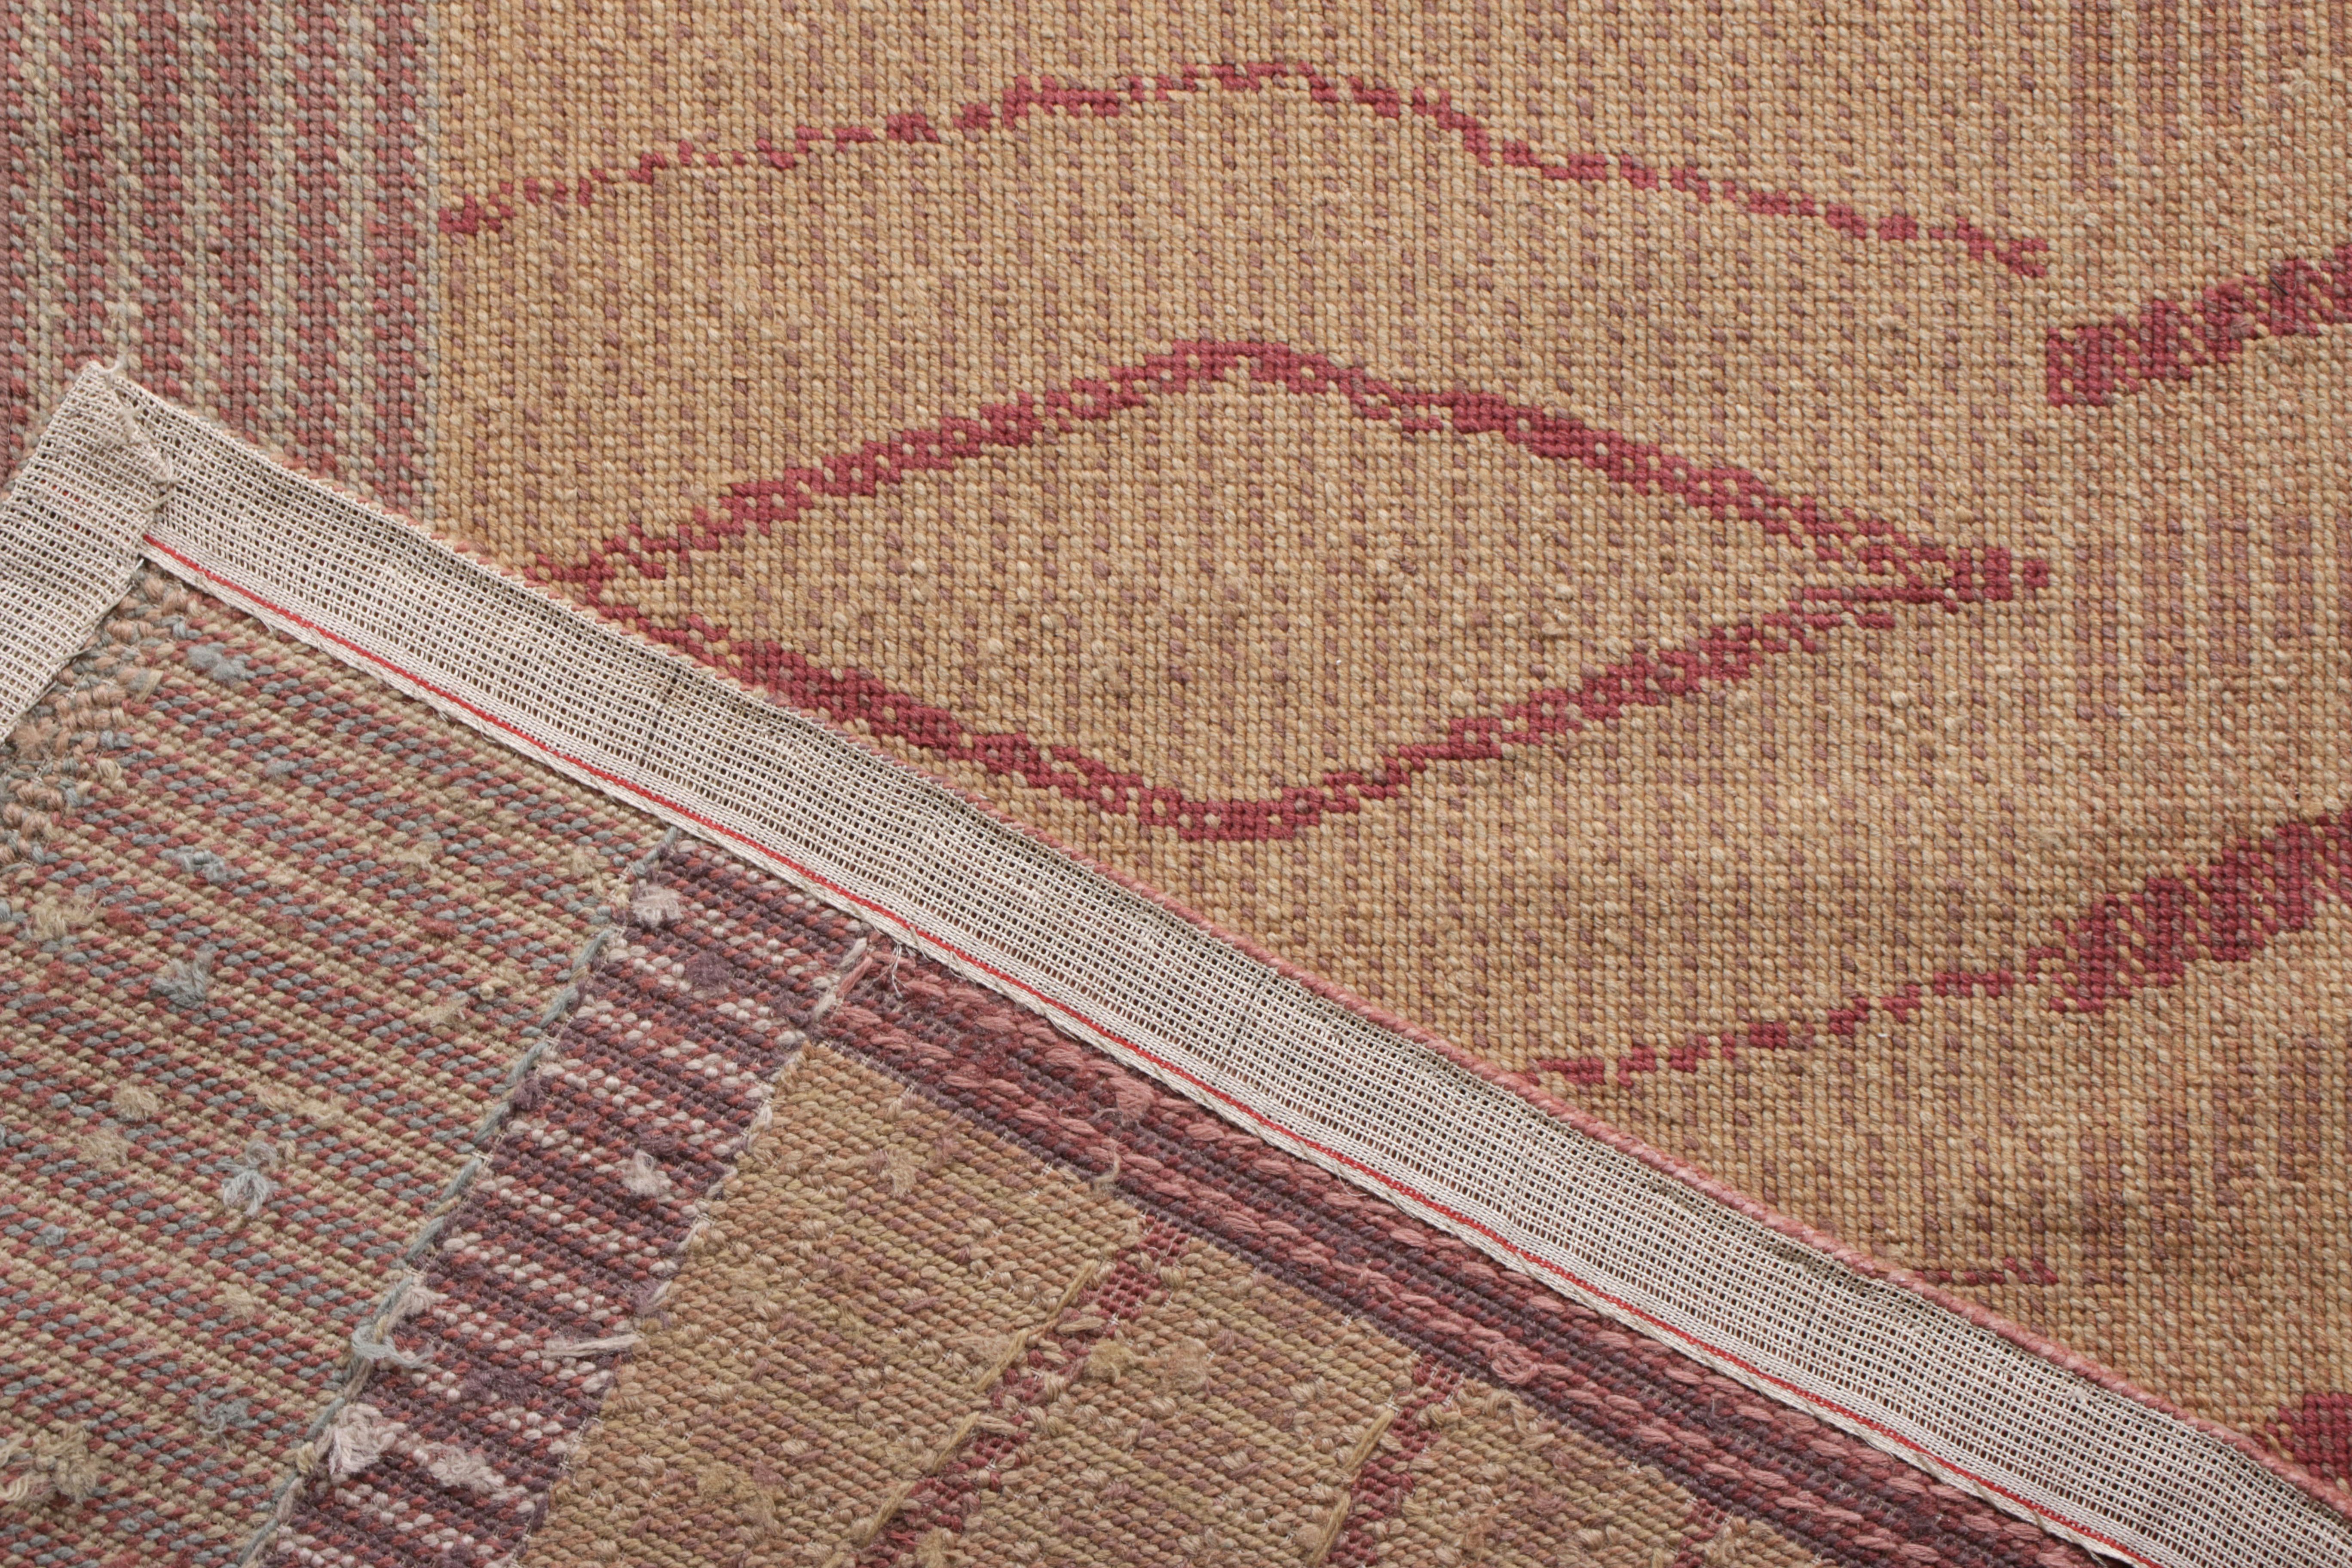 Chinese Vintage Van Campen Style Needlepoint In Mauve Geometric Patterns By Rug & Kilim For Sale